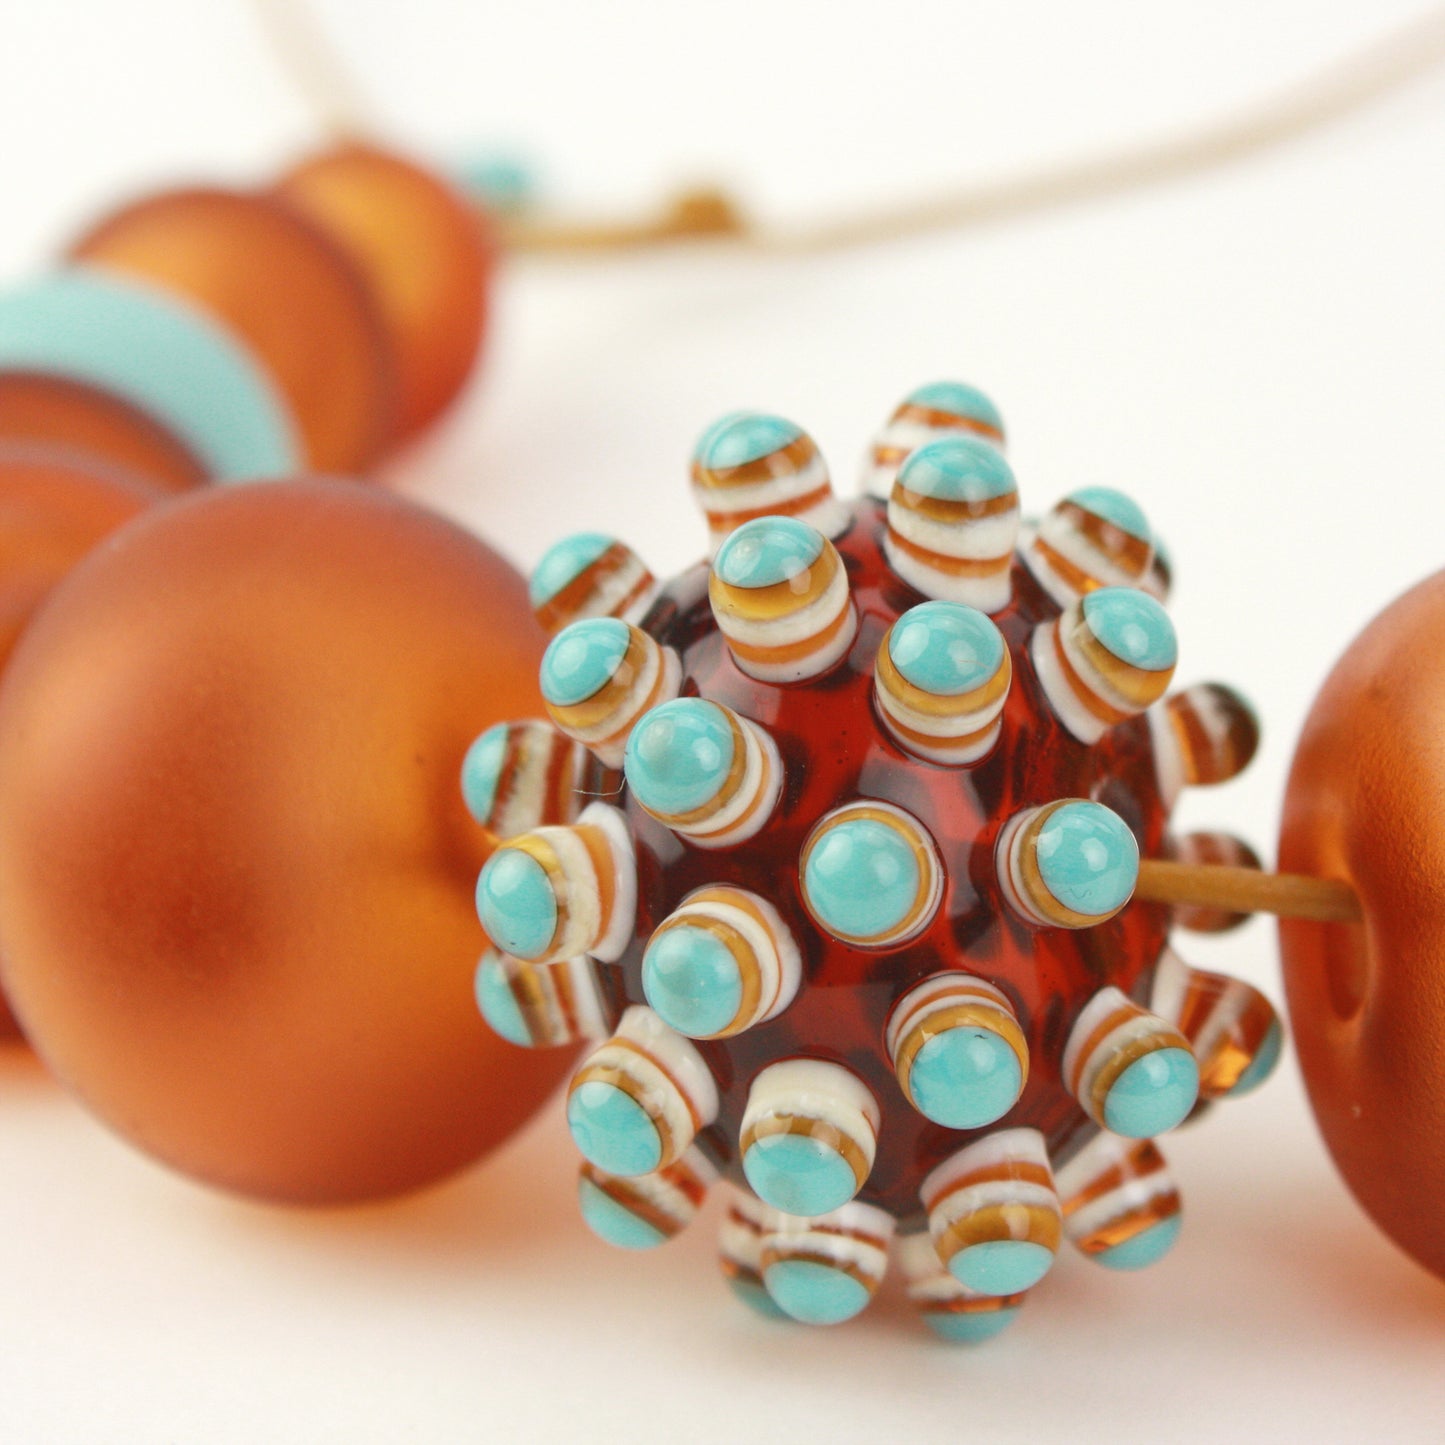 Stacked dot necklace -Amber and turquoise